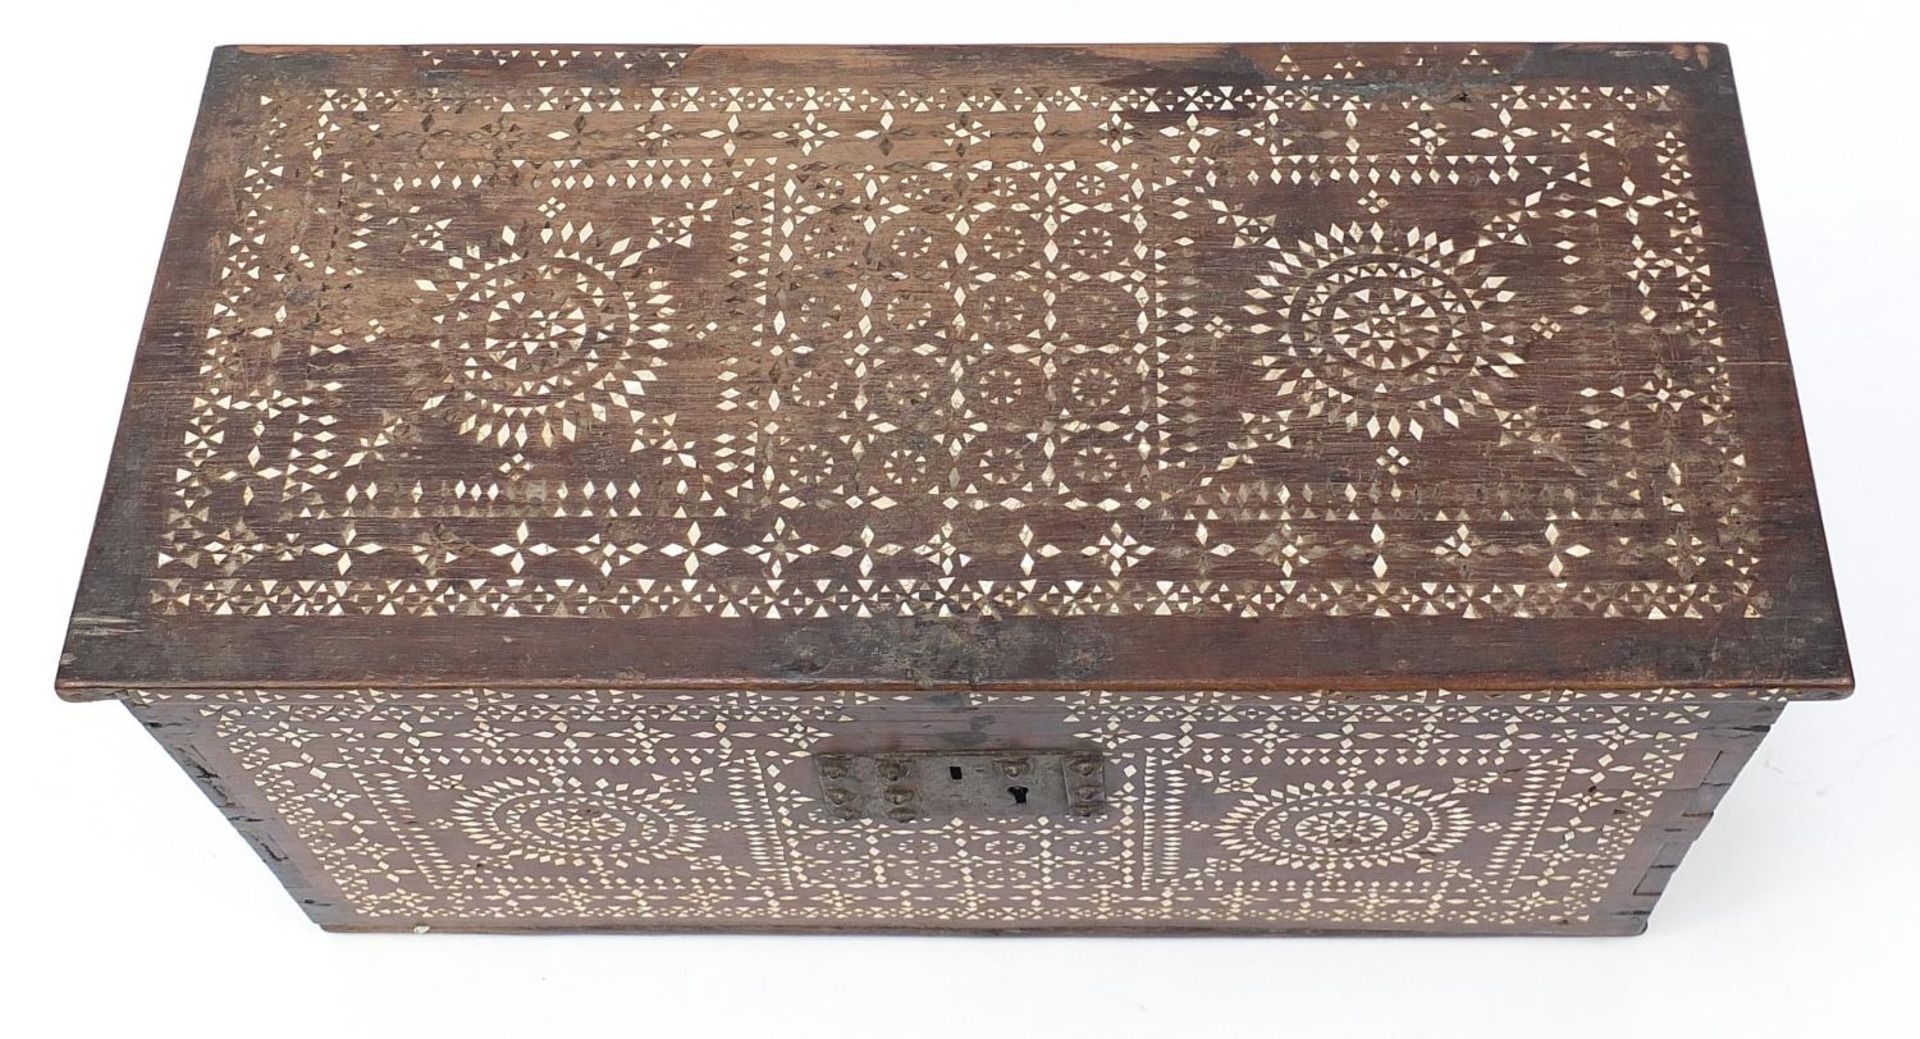 Antique Anglo Indian chest with mother of pearl inlay and iron mounts, 29cm H x 52.5cm W x 30cm D : - Image 2 of 4